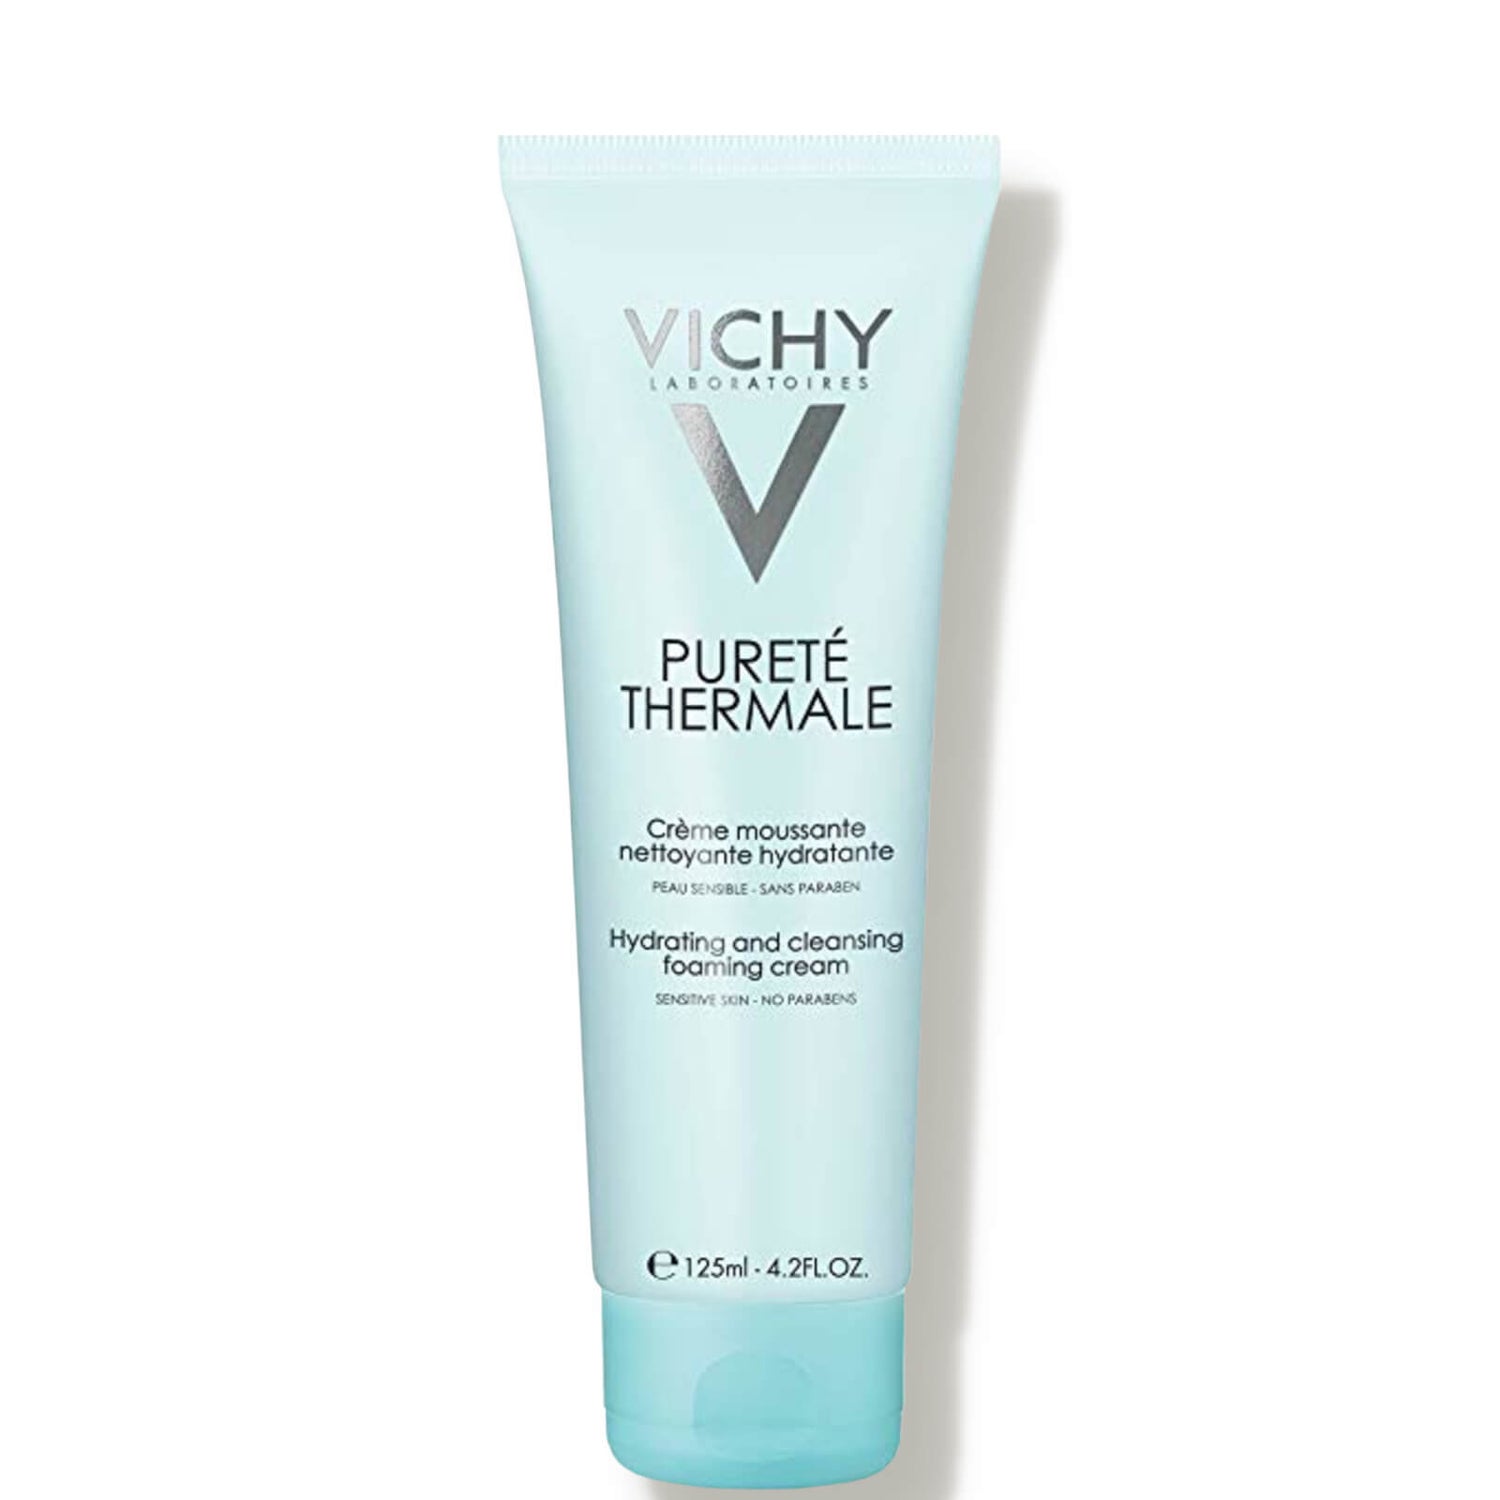 Vichy Pureté Thermale Hydrating Foaming Cream Facial Cleanser, Paraben-free, Alcohol-free, 4.2 Fl. Oz.